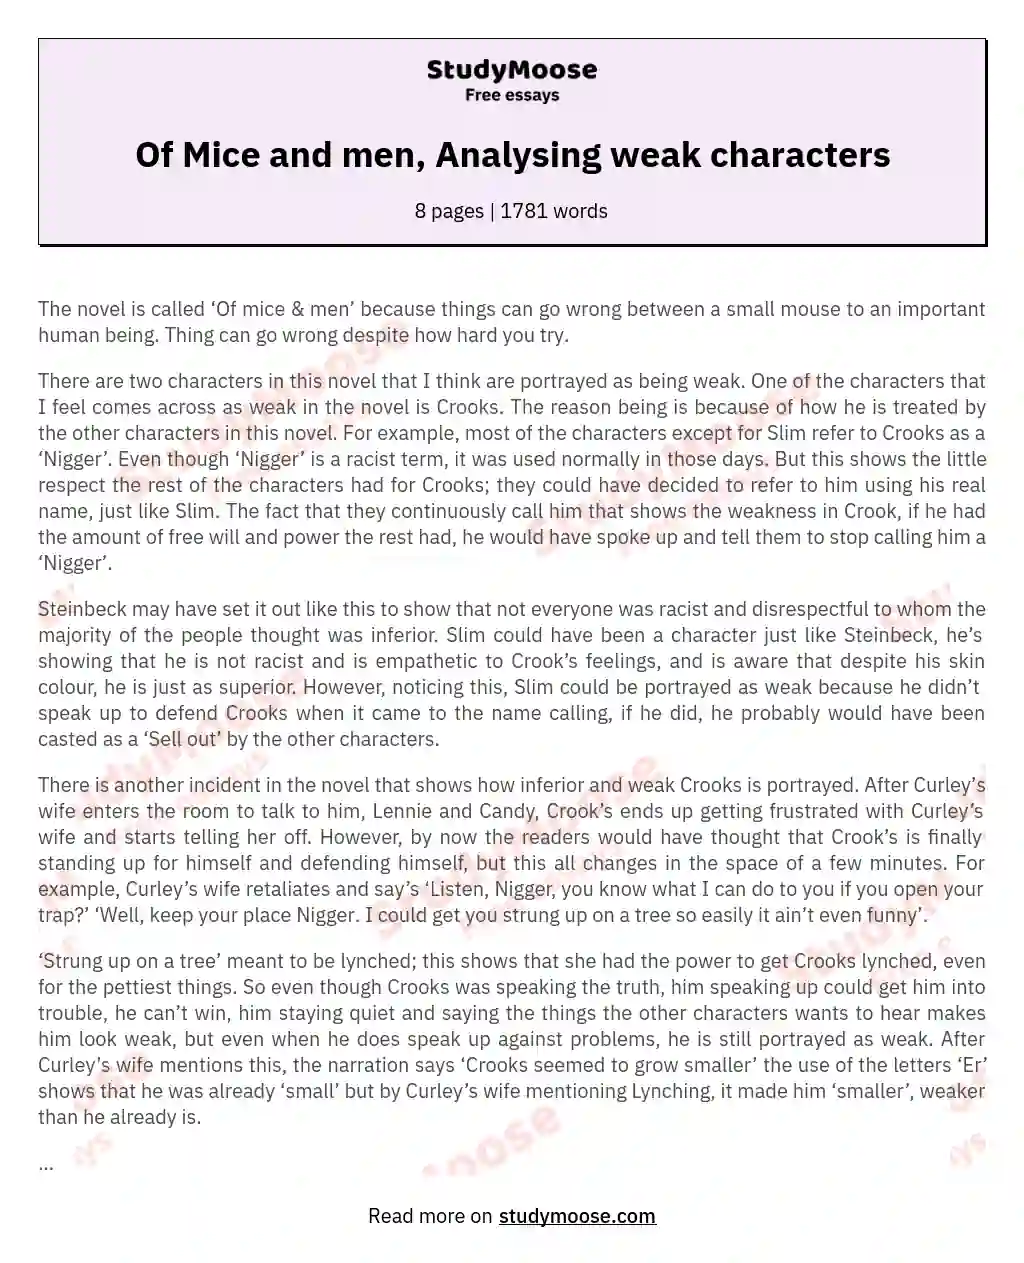 Of Mice and men, Analysing weak characters essay